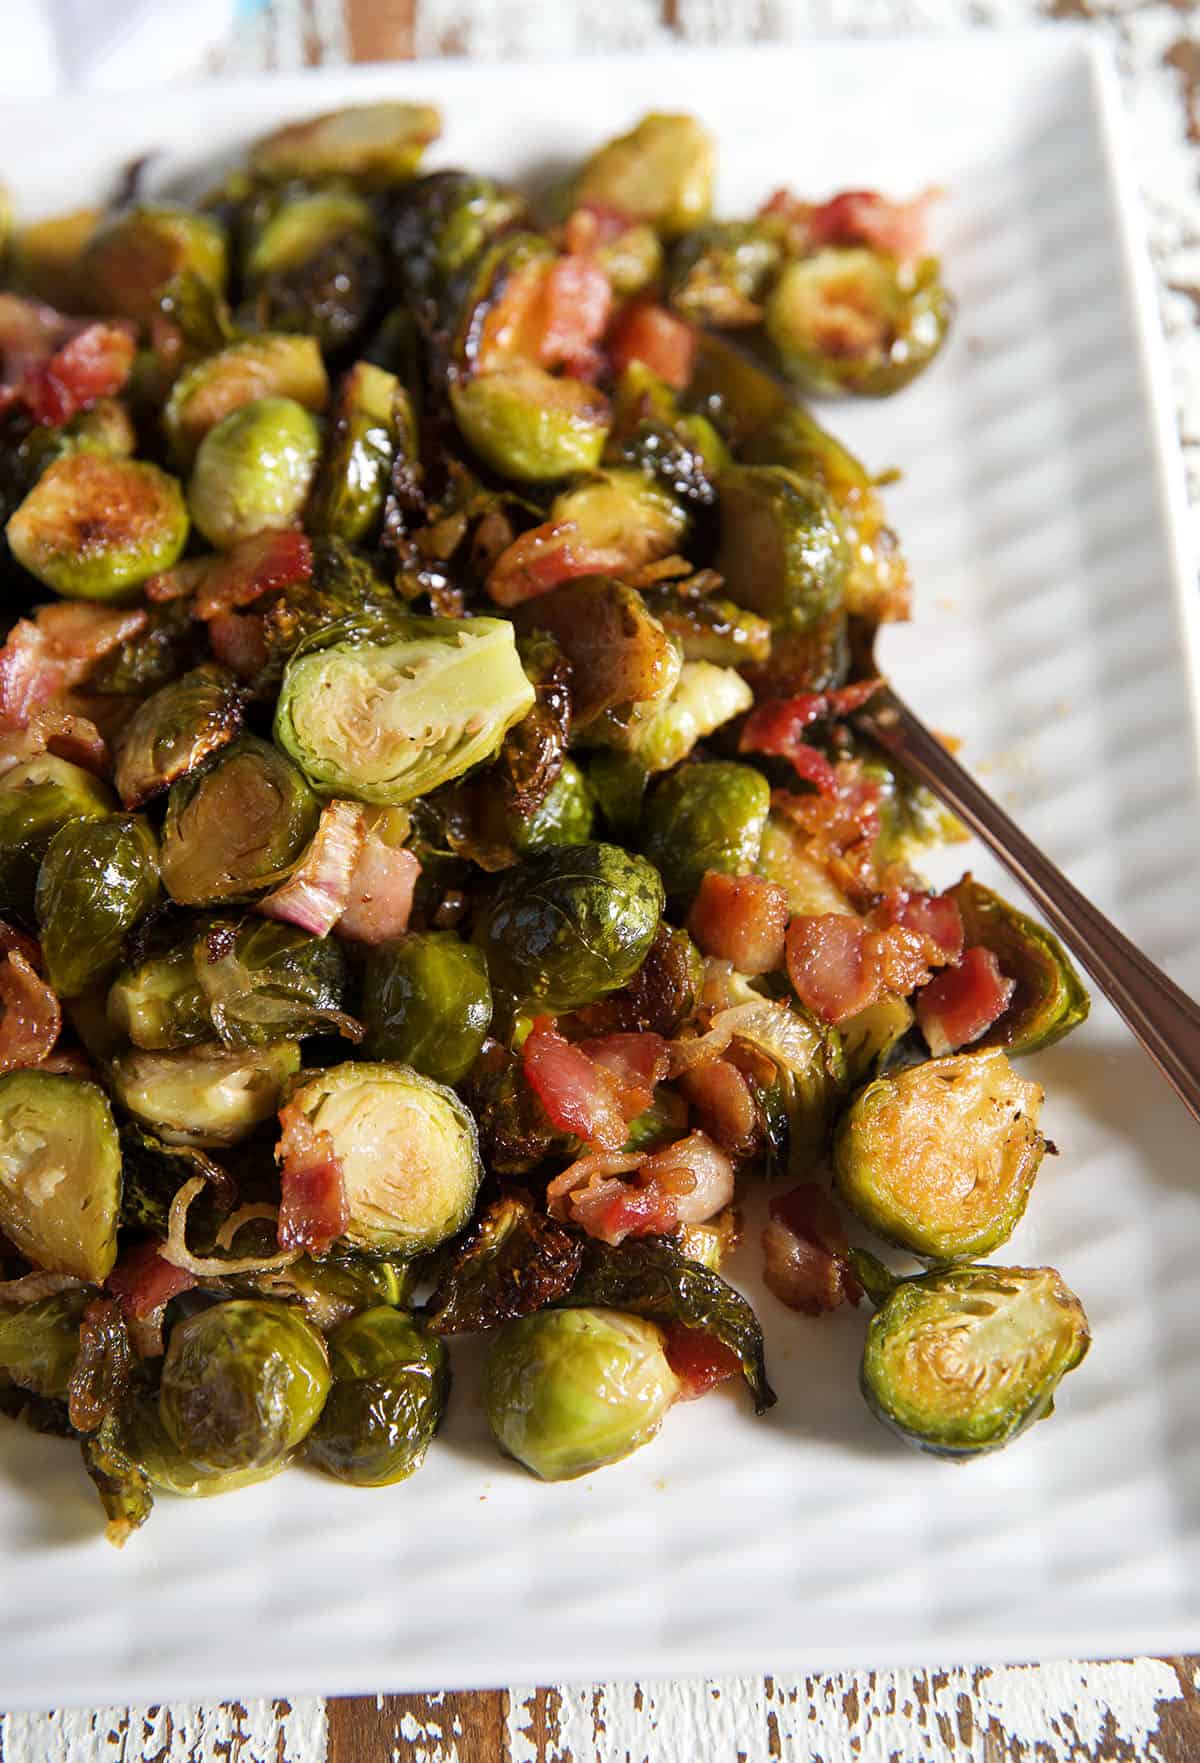 Roasted maple bacon brussel sprouts are presented on a white serving platter.